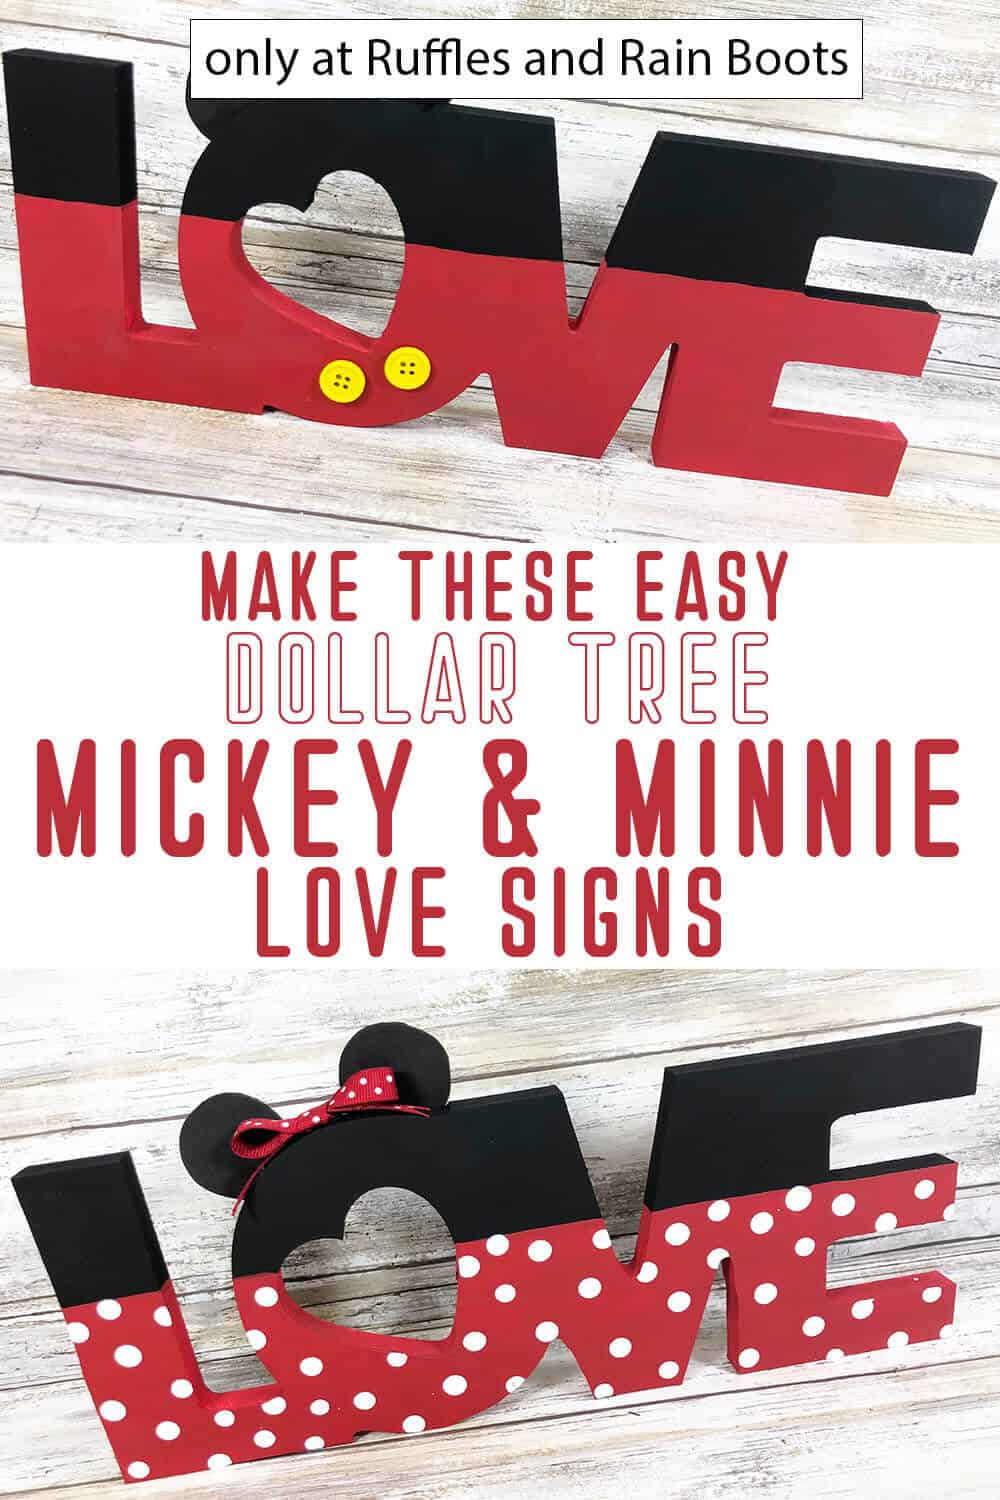 photo collage of mickey and minnie love sign dollar tree craft for valentines with text which reads make these easy dollar tree mickey & minnie love signs